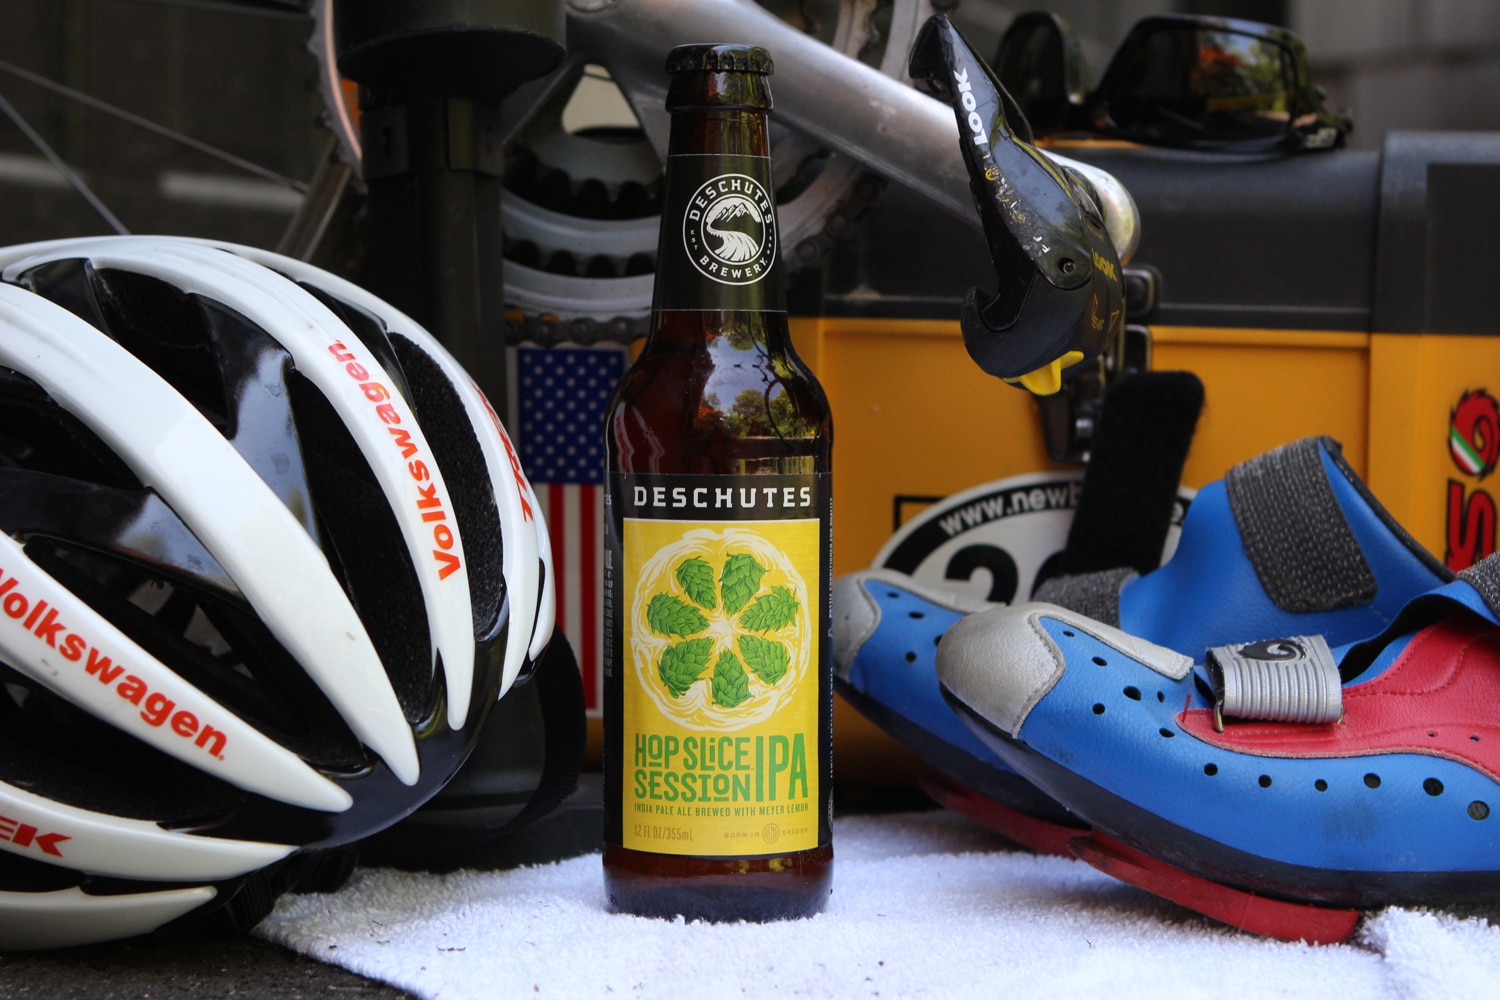 Deschutes Hop Slice is a beautiful summer session IPA beer.